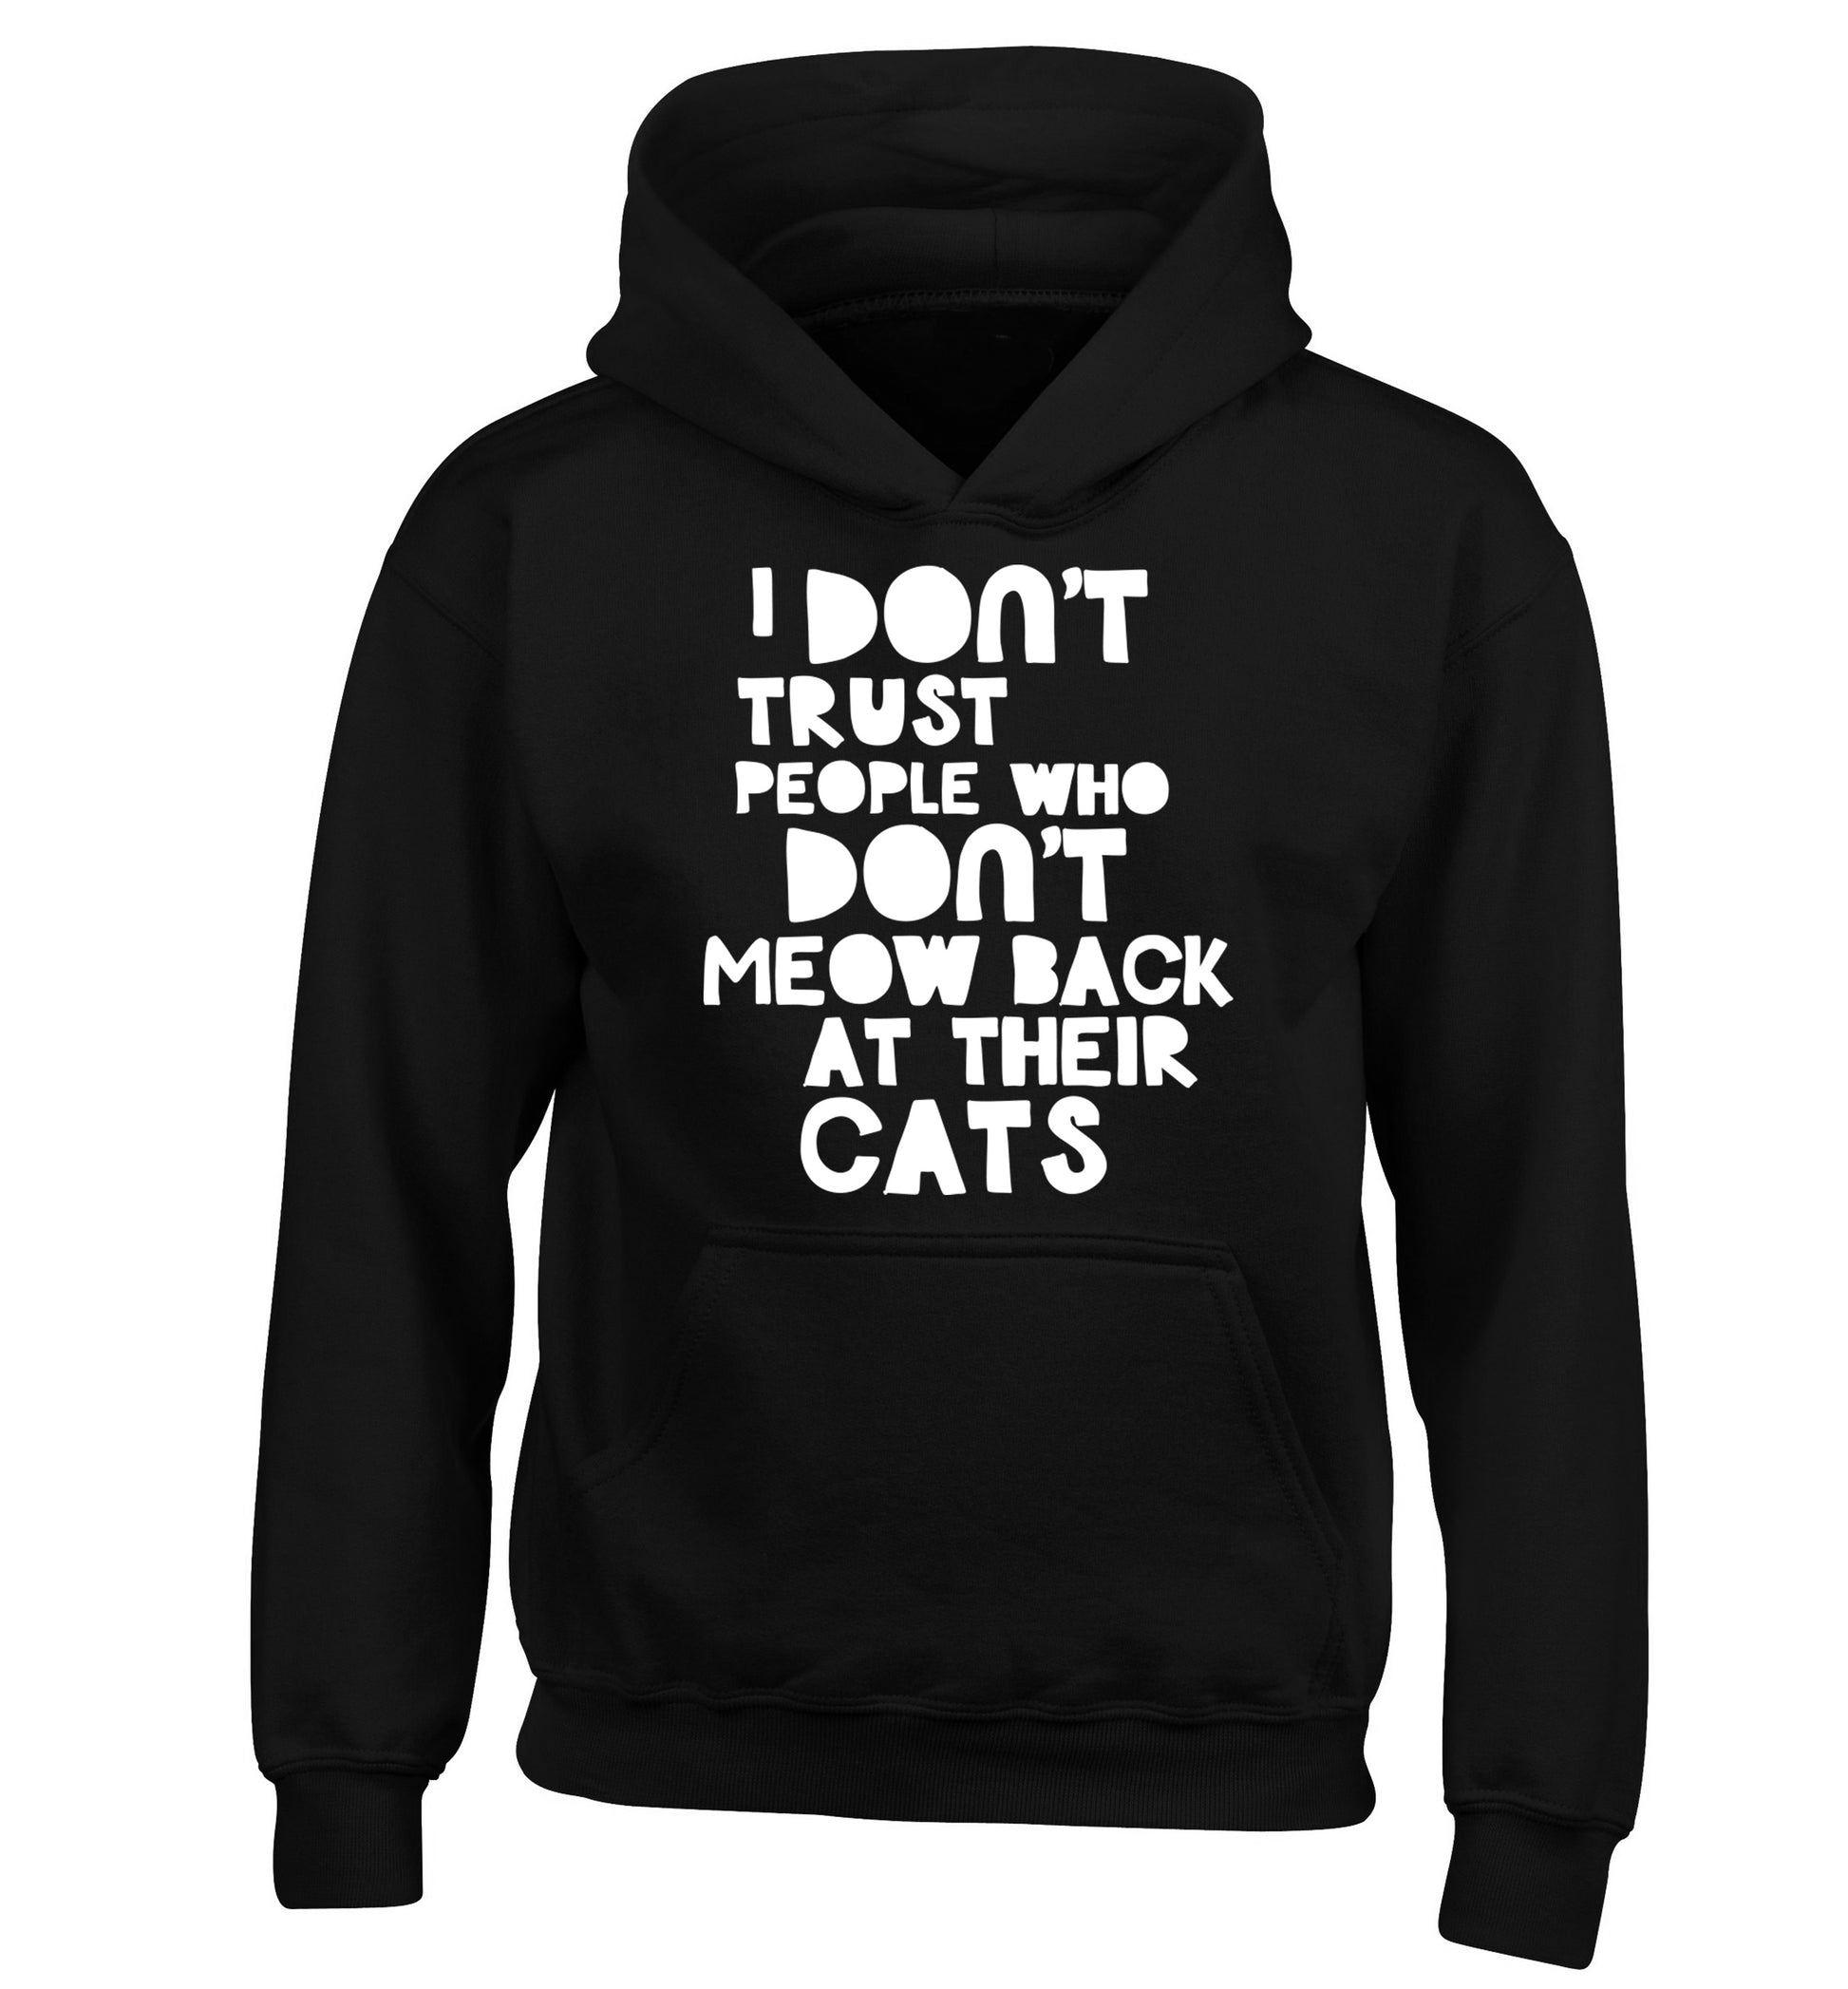 I don't trust people who don't meow back at their cats children's black hoodie 12-13 Years